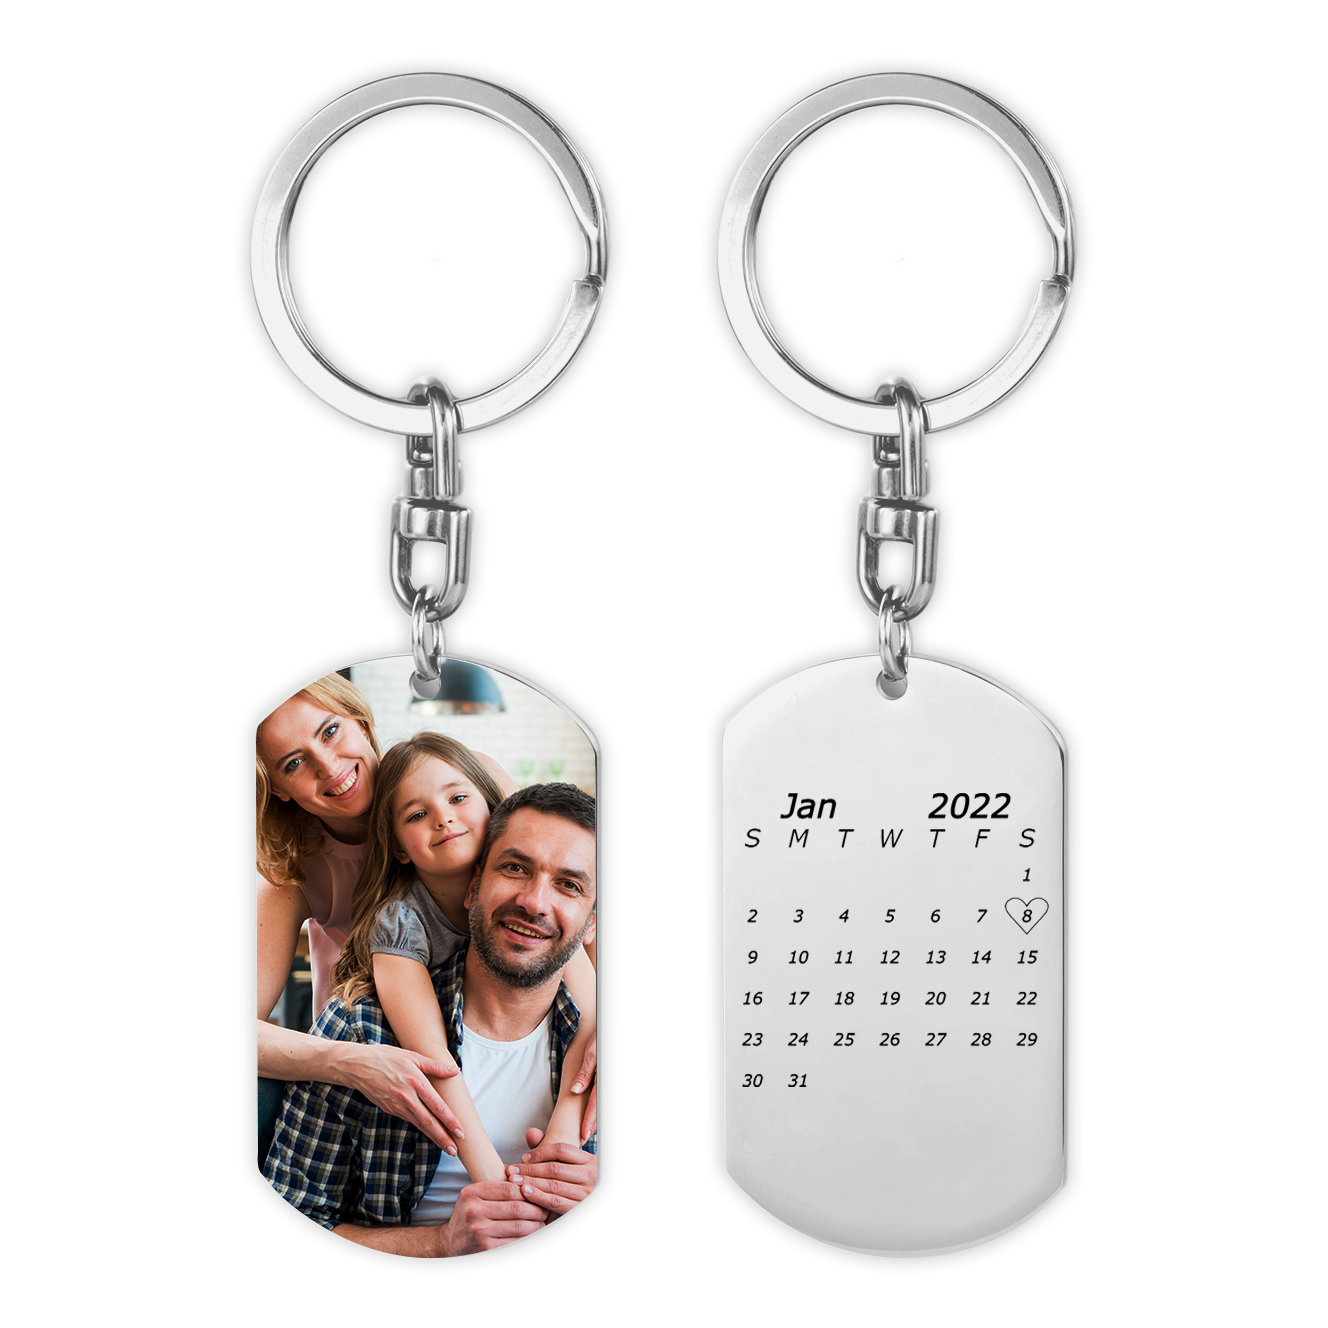 Personalized Photo Keychain with Engraving 1 Special Date Keyring Gifts for Love One